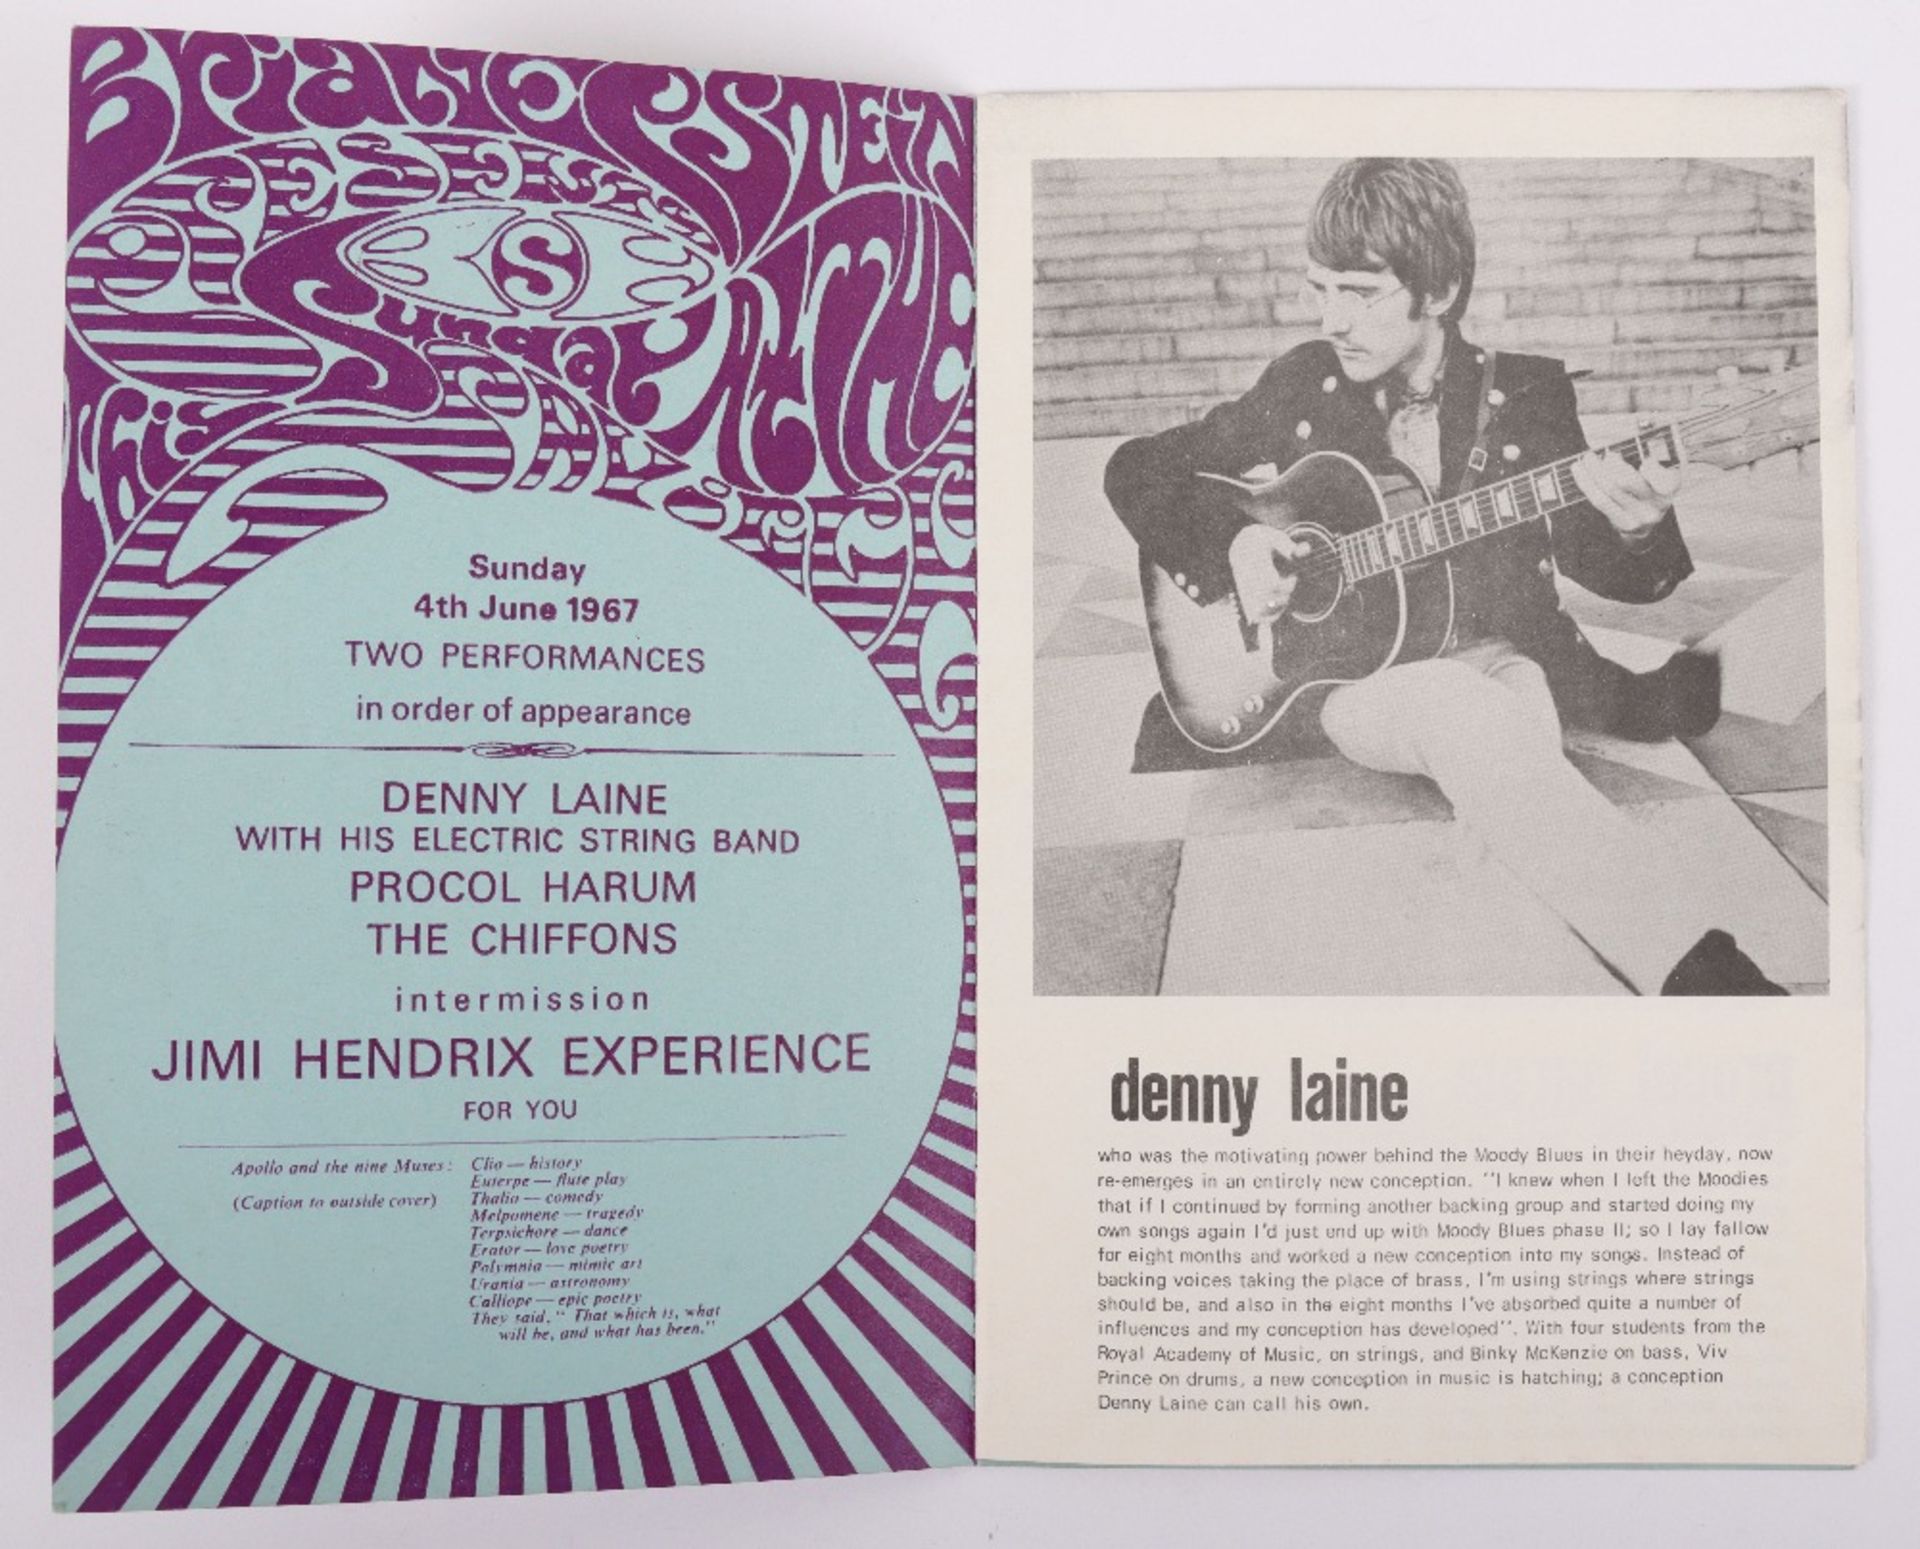 Programme for Sunday at the Saville featuring The Jimi Hendrix Experience Sunday 4th June 1967 - Image 2 of 5